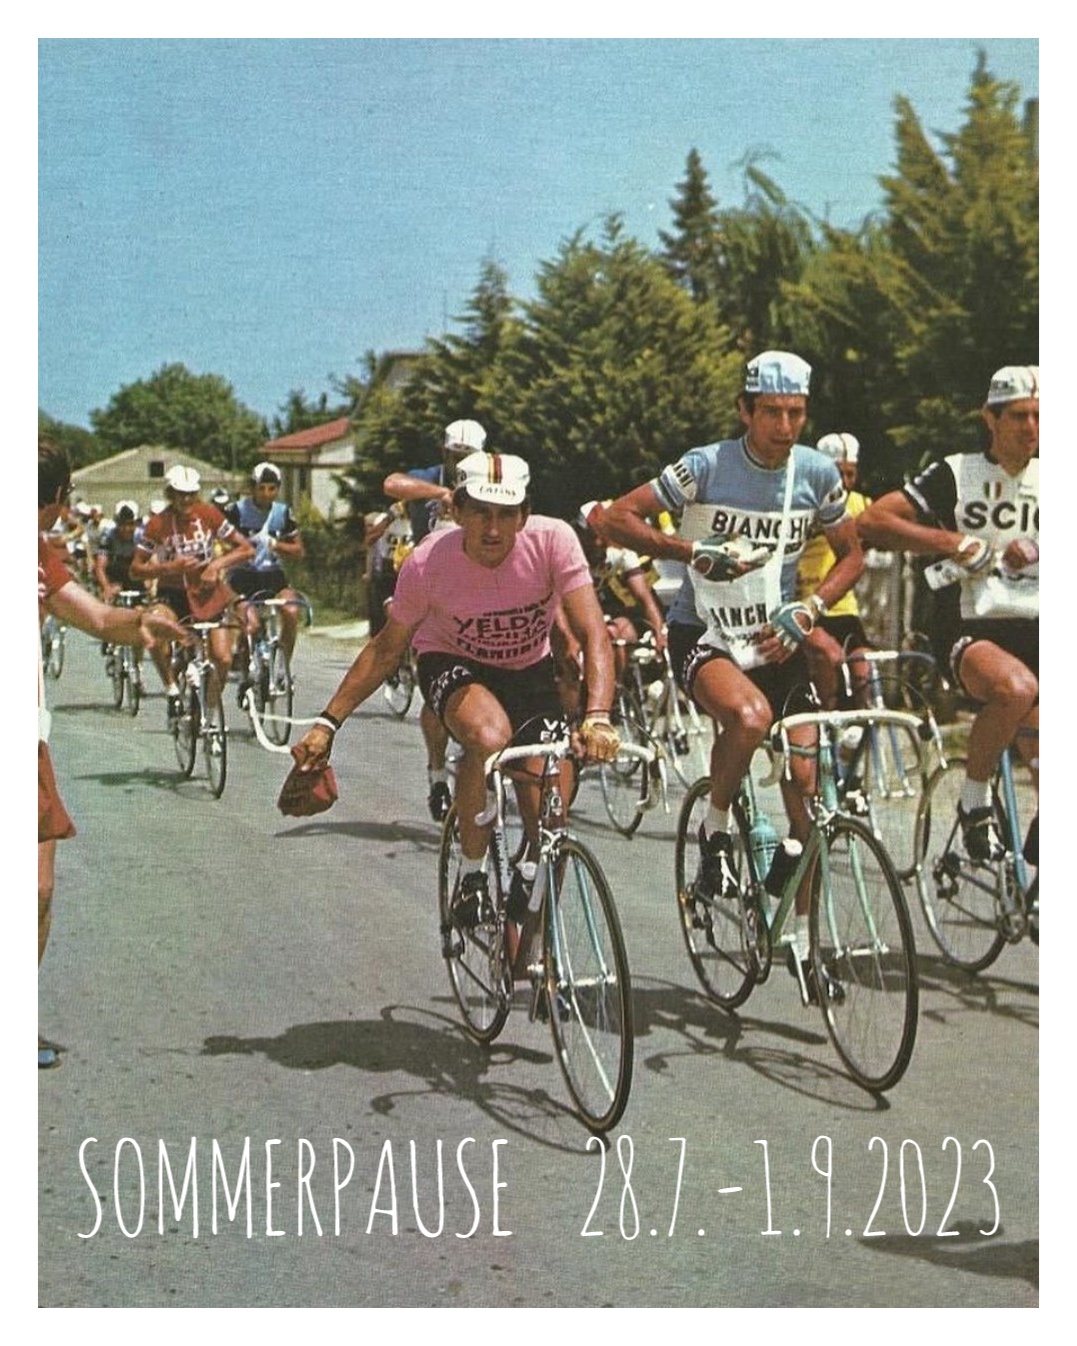 Sommerpause 28.7.-1.9.2023